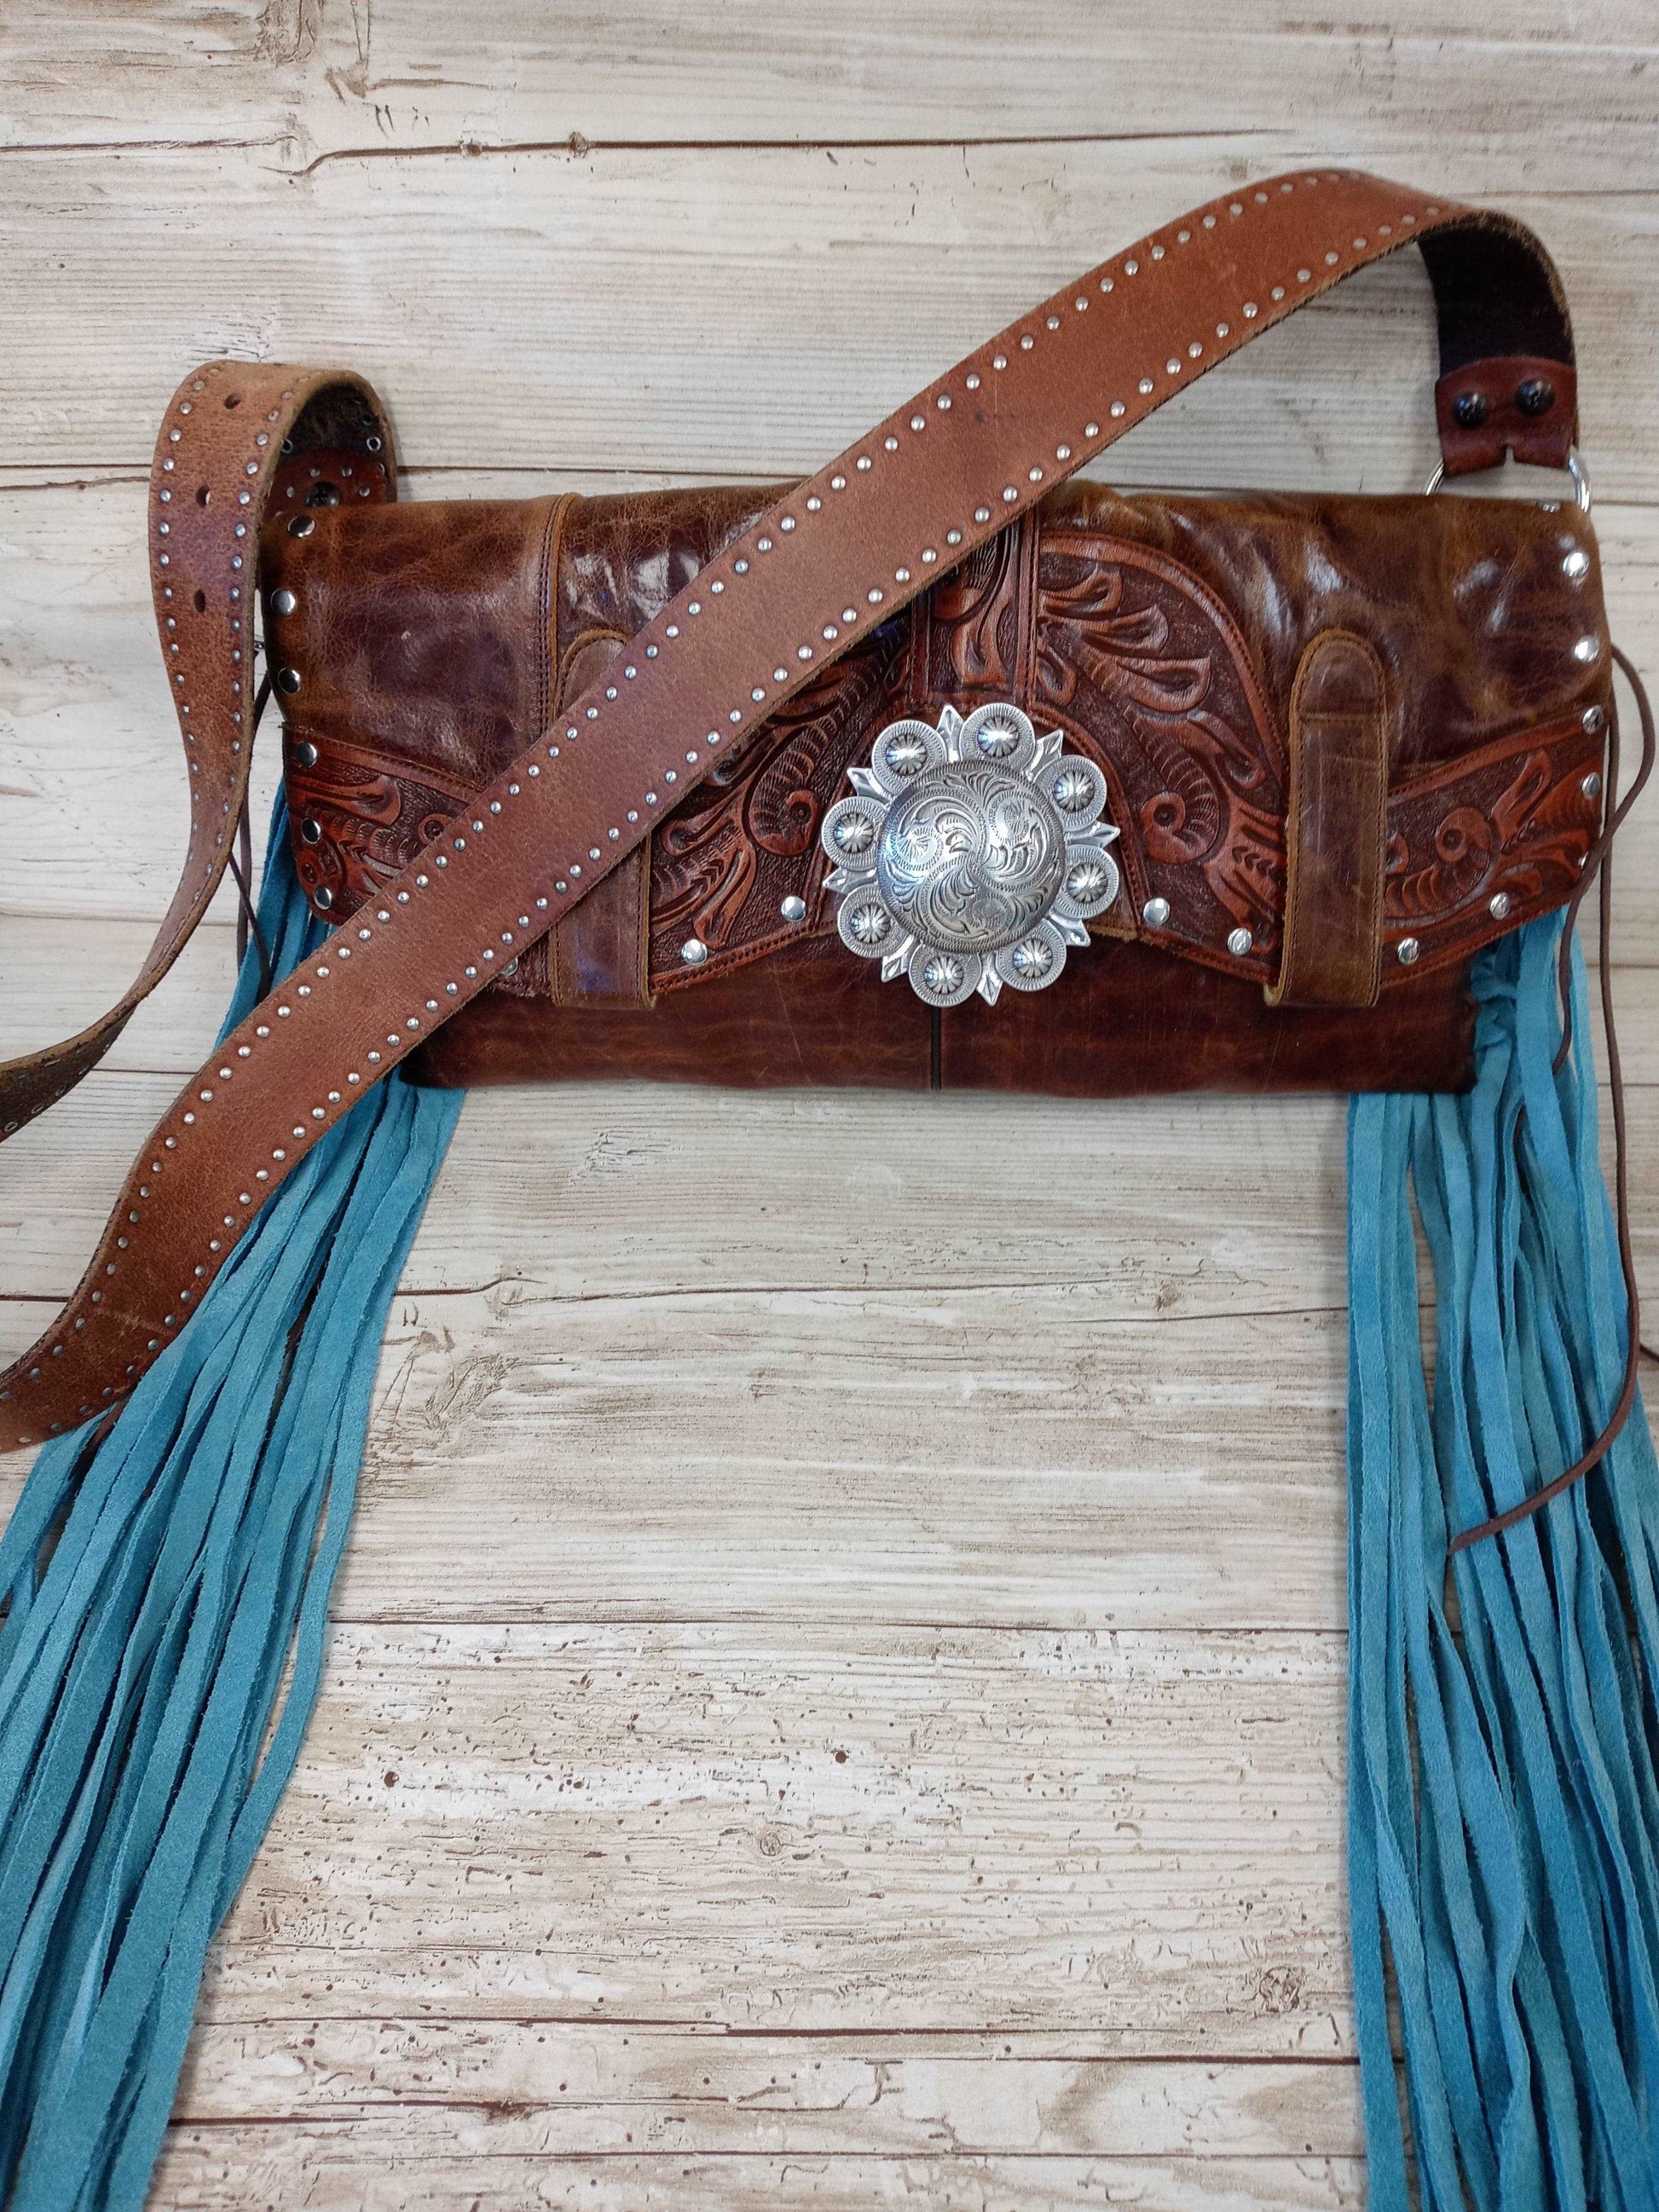 Clutch Cowboy Boot Purse CL04 handcrafted from cowboy boots. Shop all unique leather western handbags, purses and totes at Chris Thompson Bags